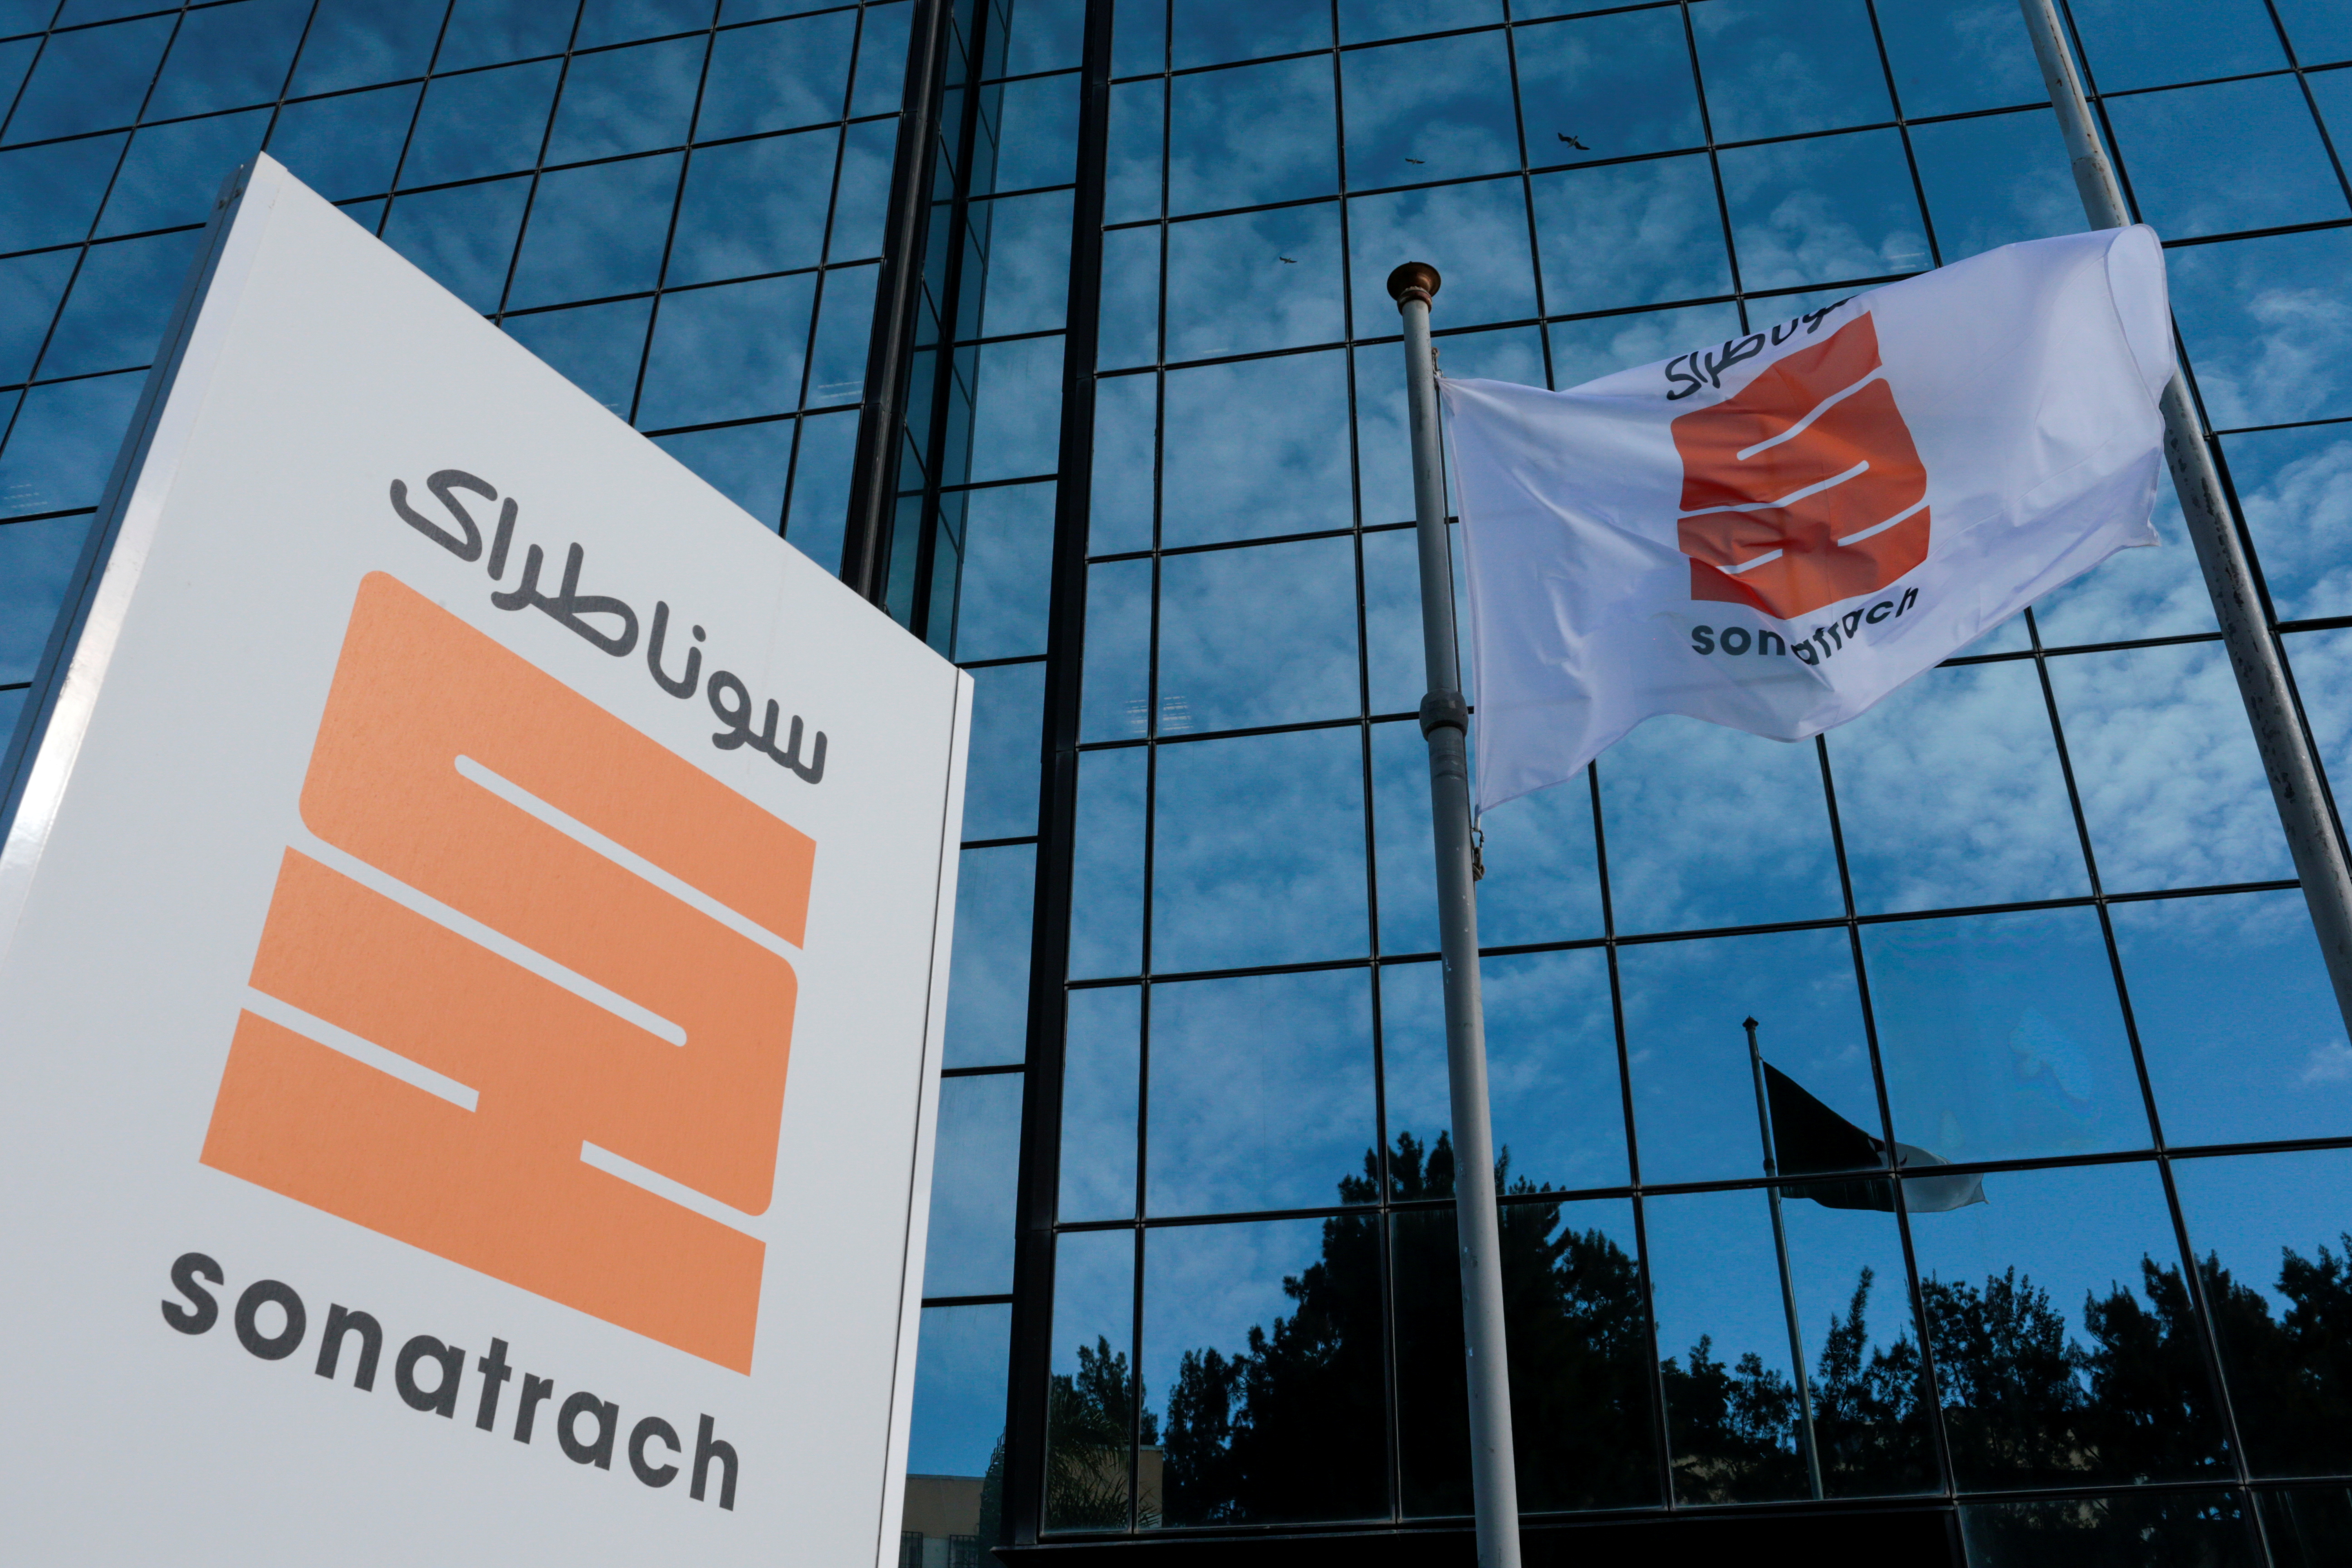 The logo of the state energy company Sonatrach is pictured at the headquarters in Algiers, Algeria November 25, 2019. REUTERS/Ramzi Boudina/File Photo